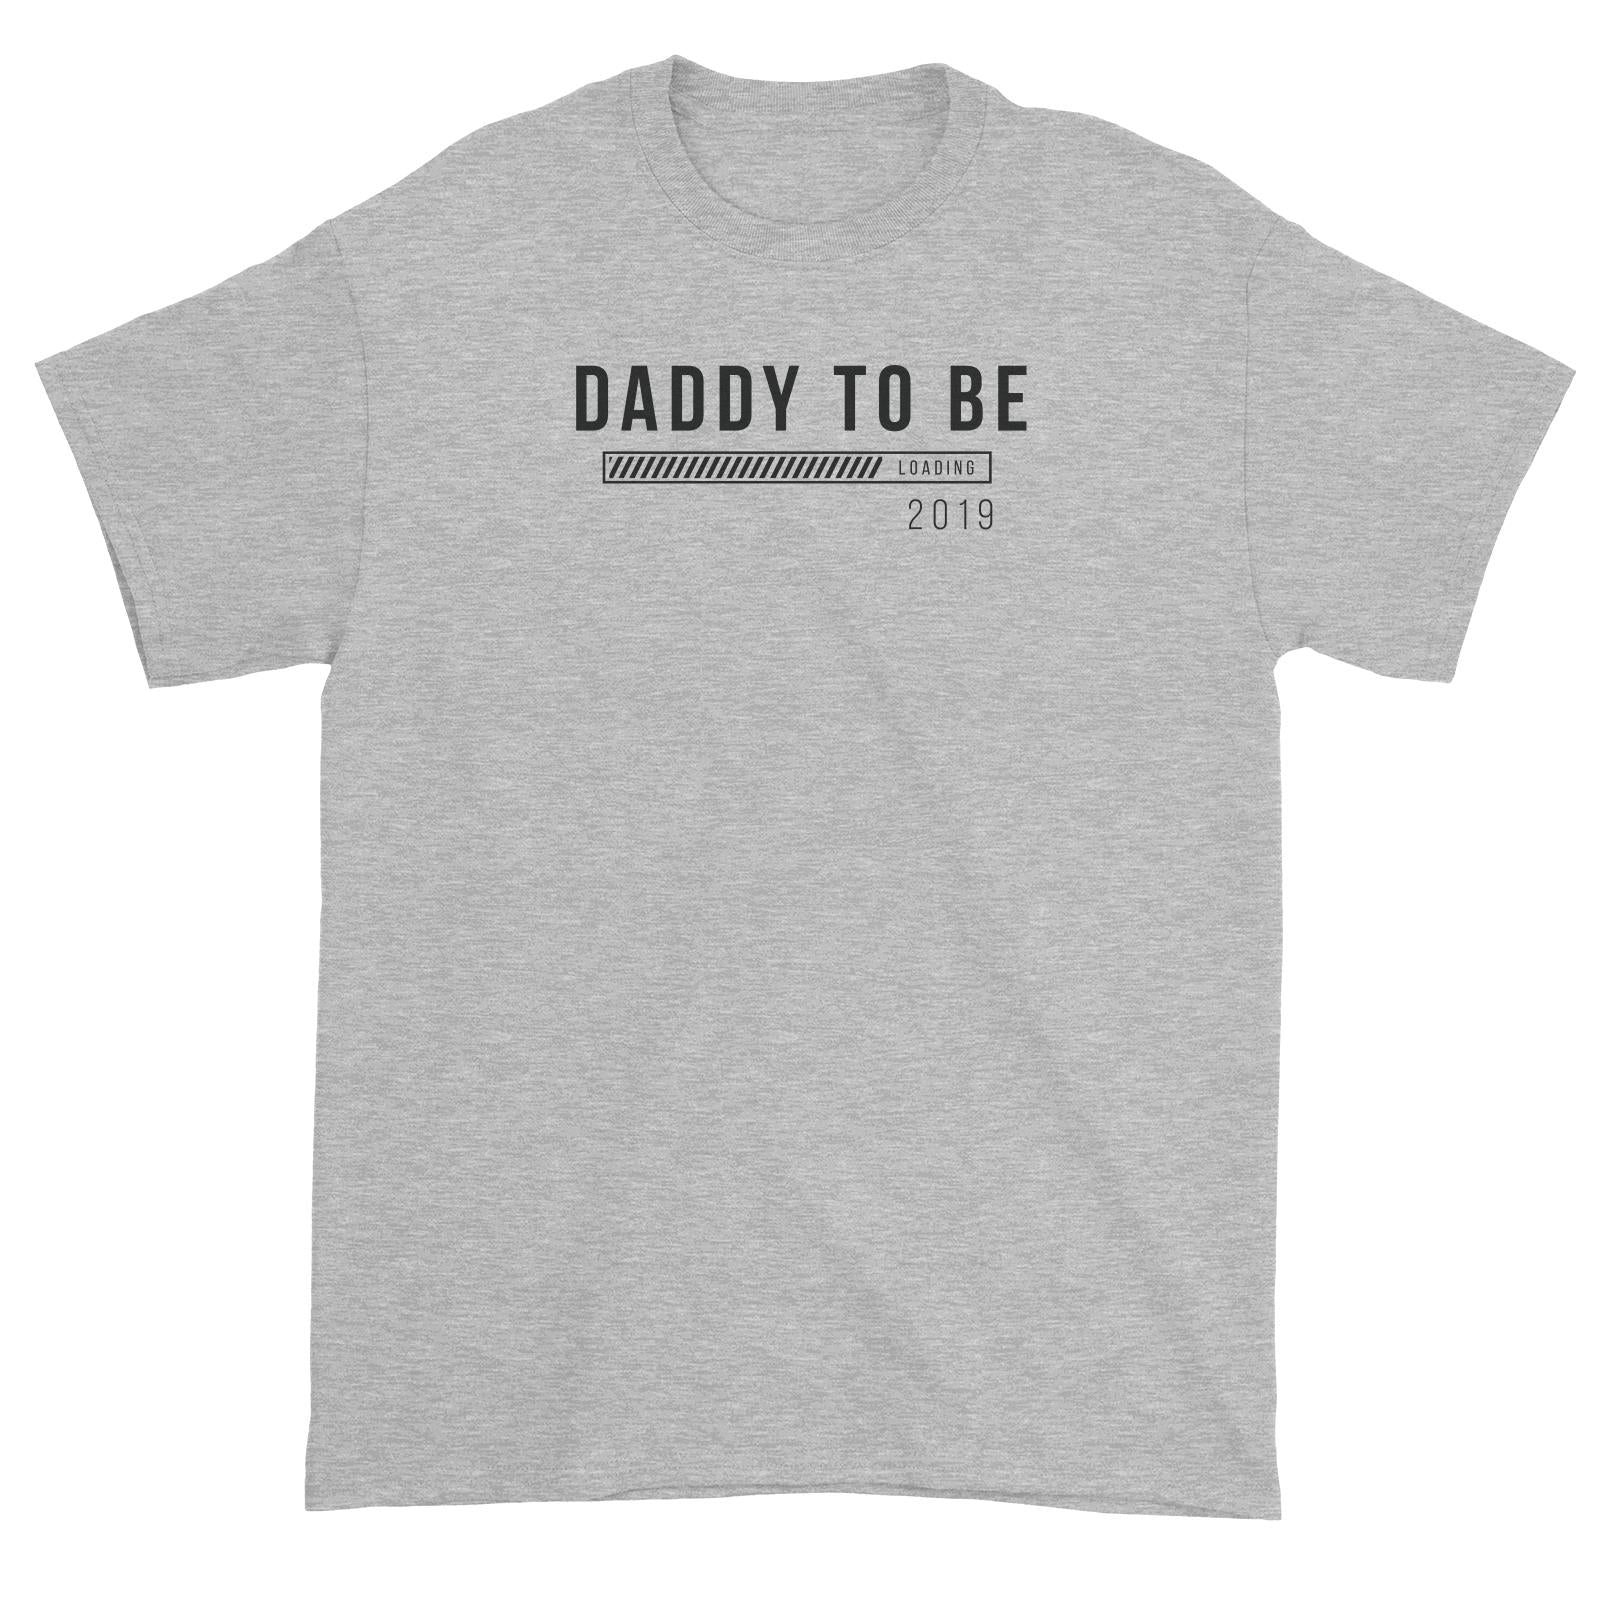 Coming Soon Family Daddy To Be Loading Add Date Unisex T-Shirt